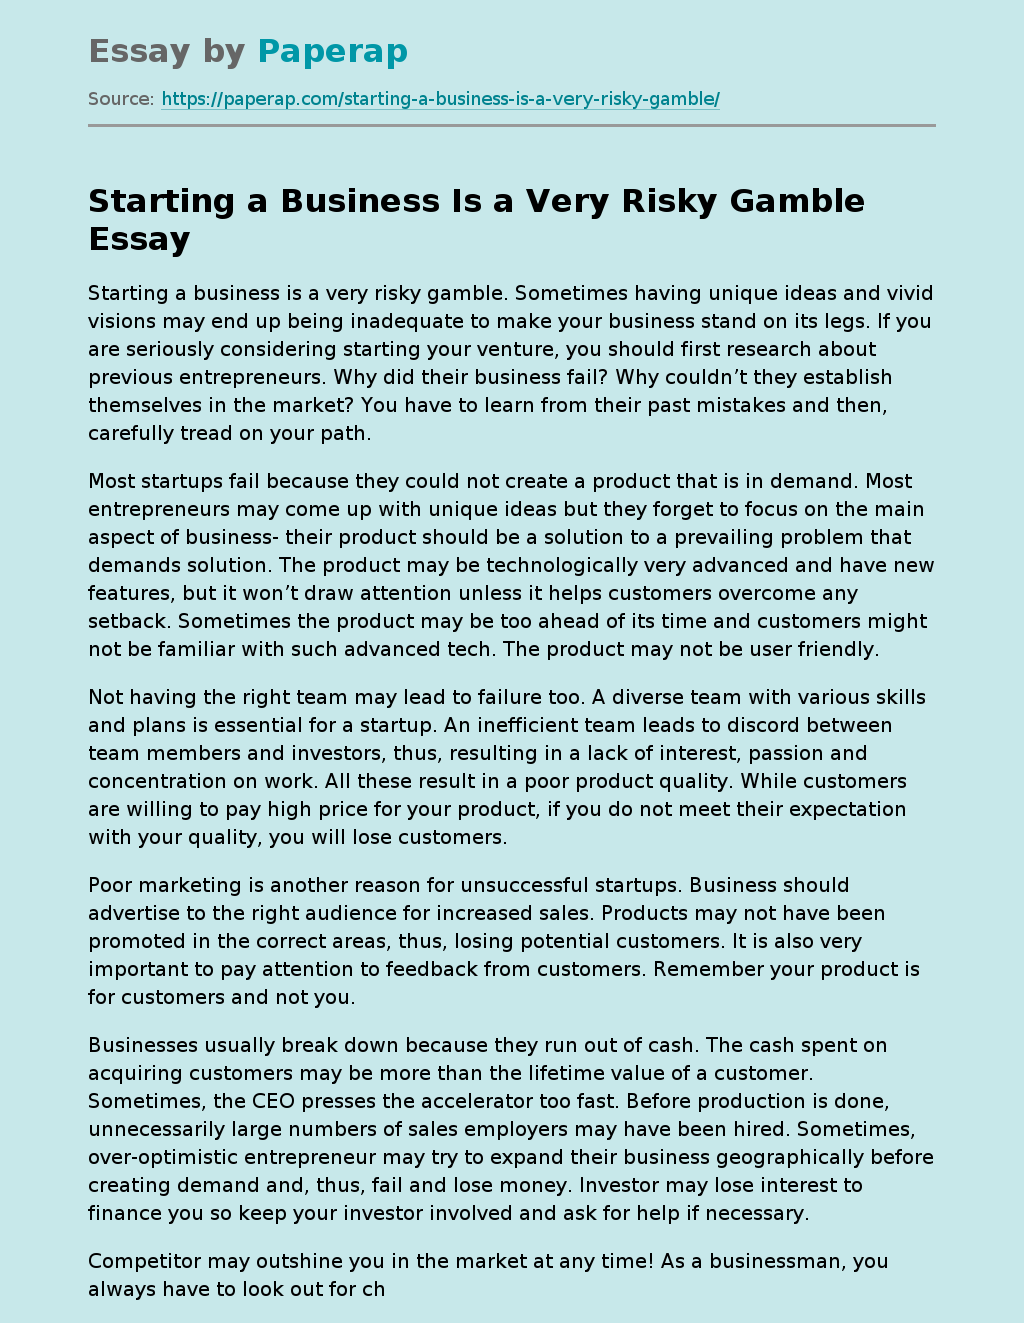 Starting a Business Is a Very Risky Gamble